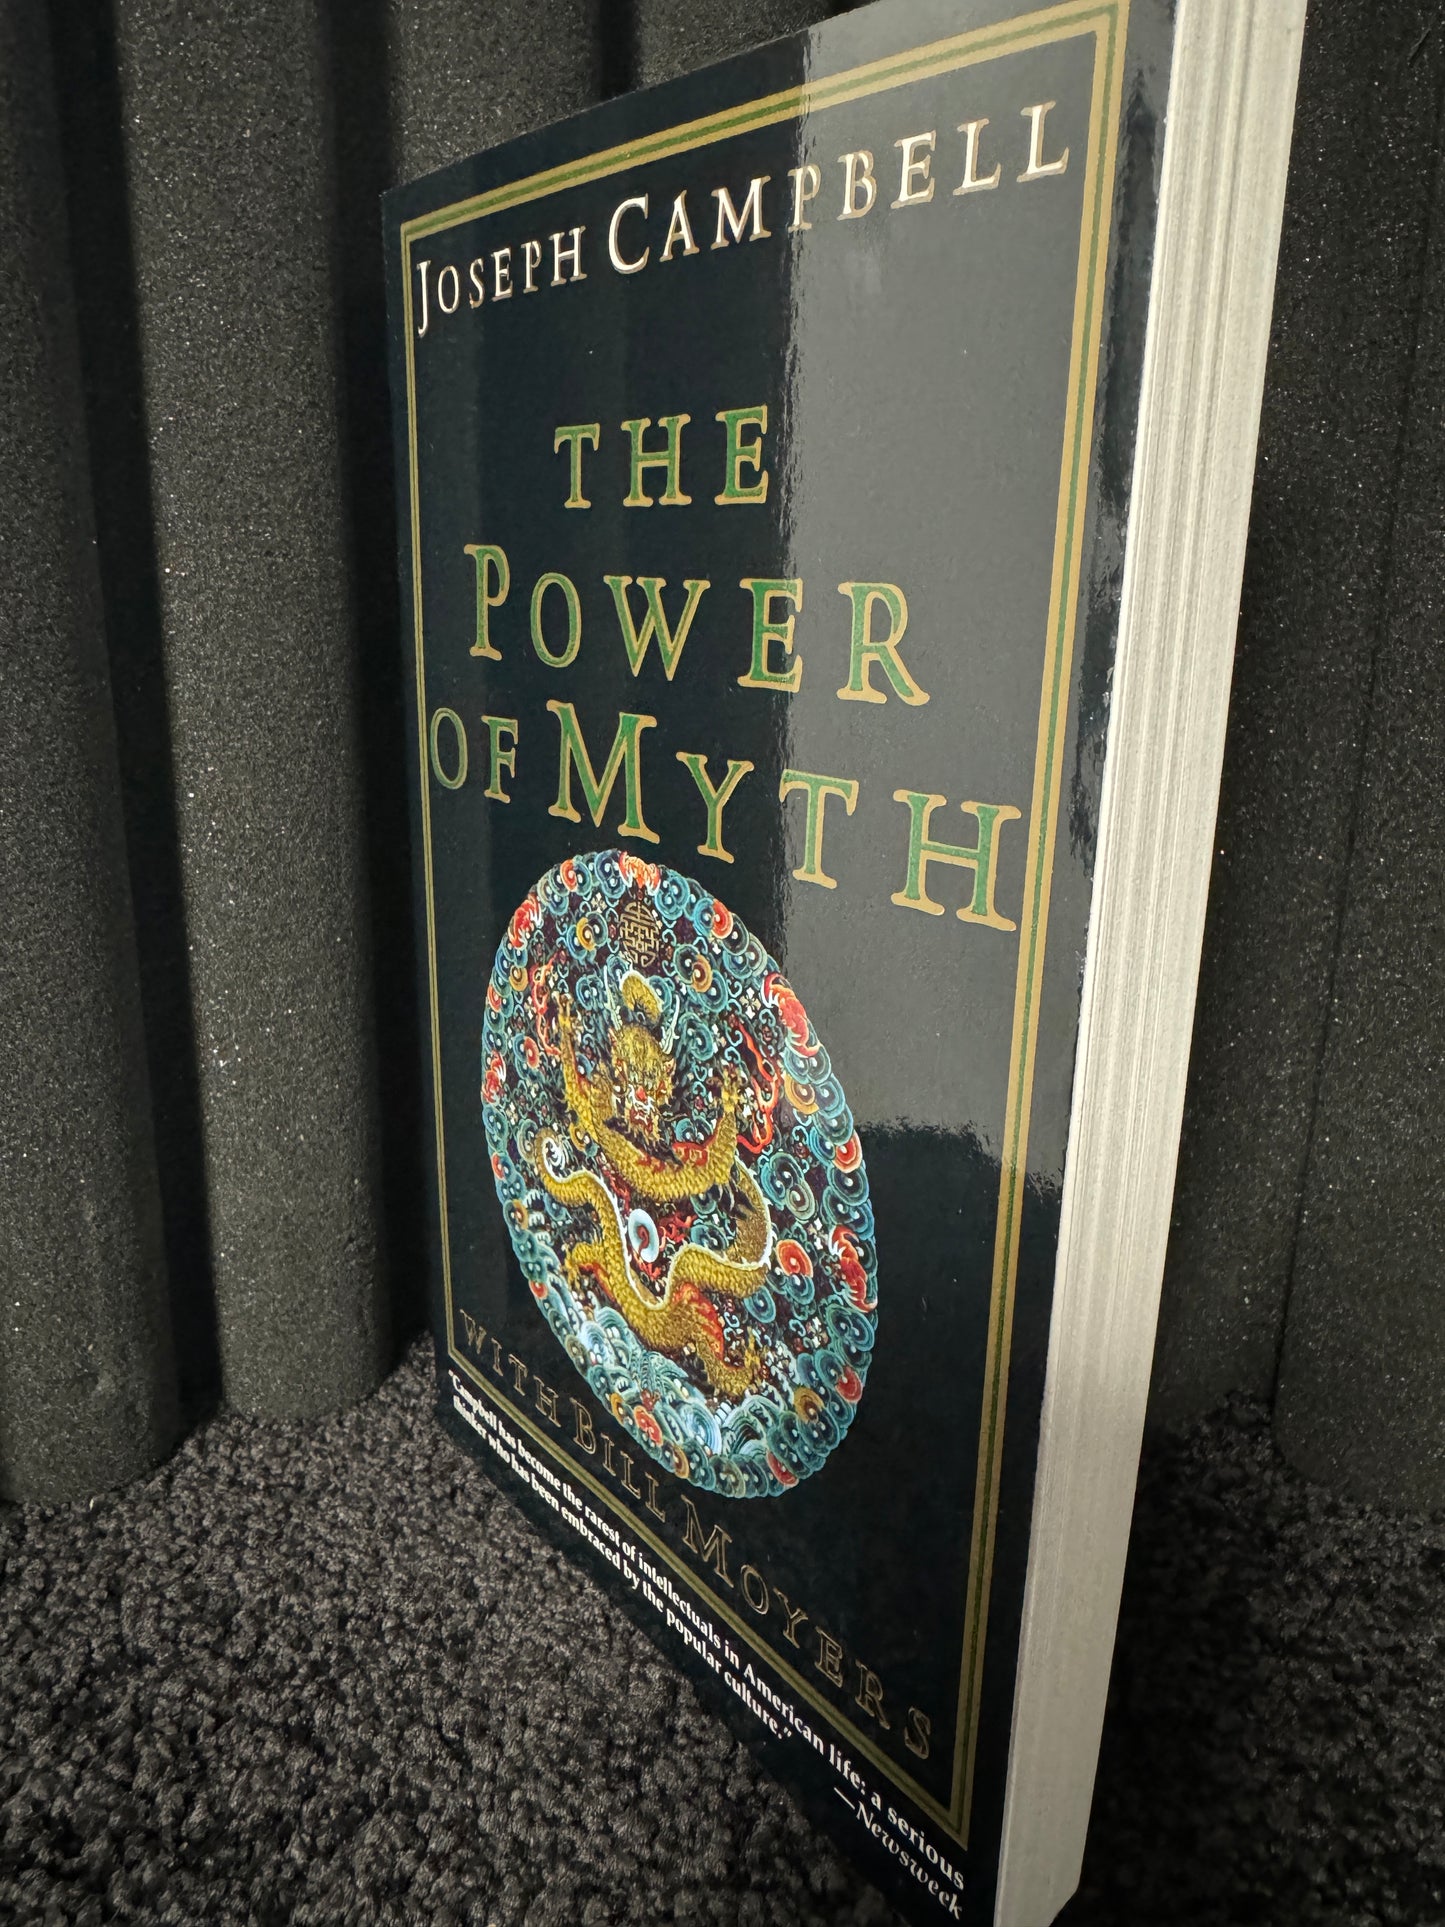 The Power Of Myth by Joseph Campbell